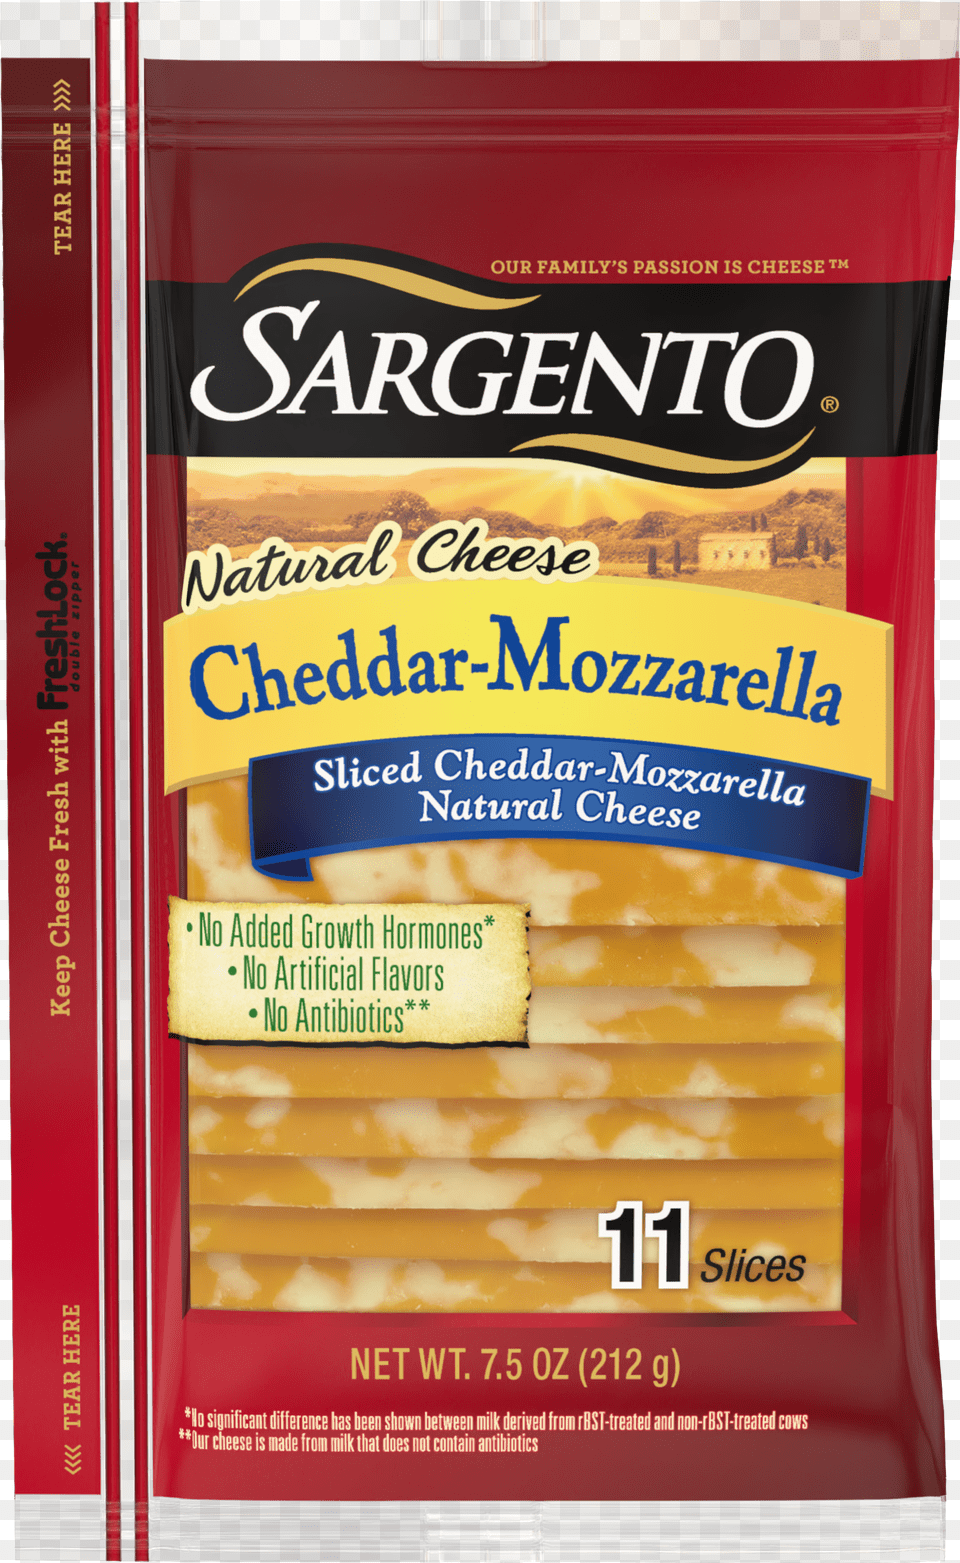 Sargentosliced Cheddar Mozzarella Natural Cheese Cheddar Cheese Slices Free Png Download